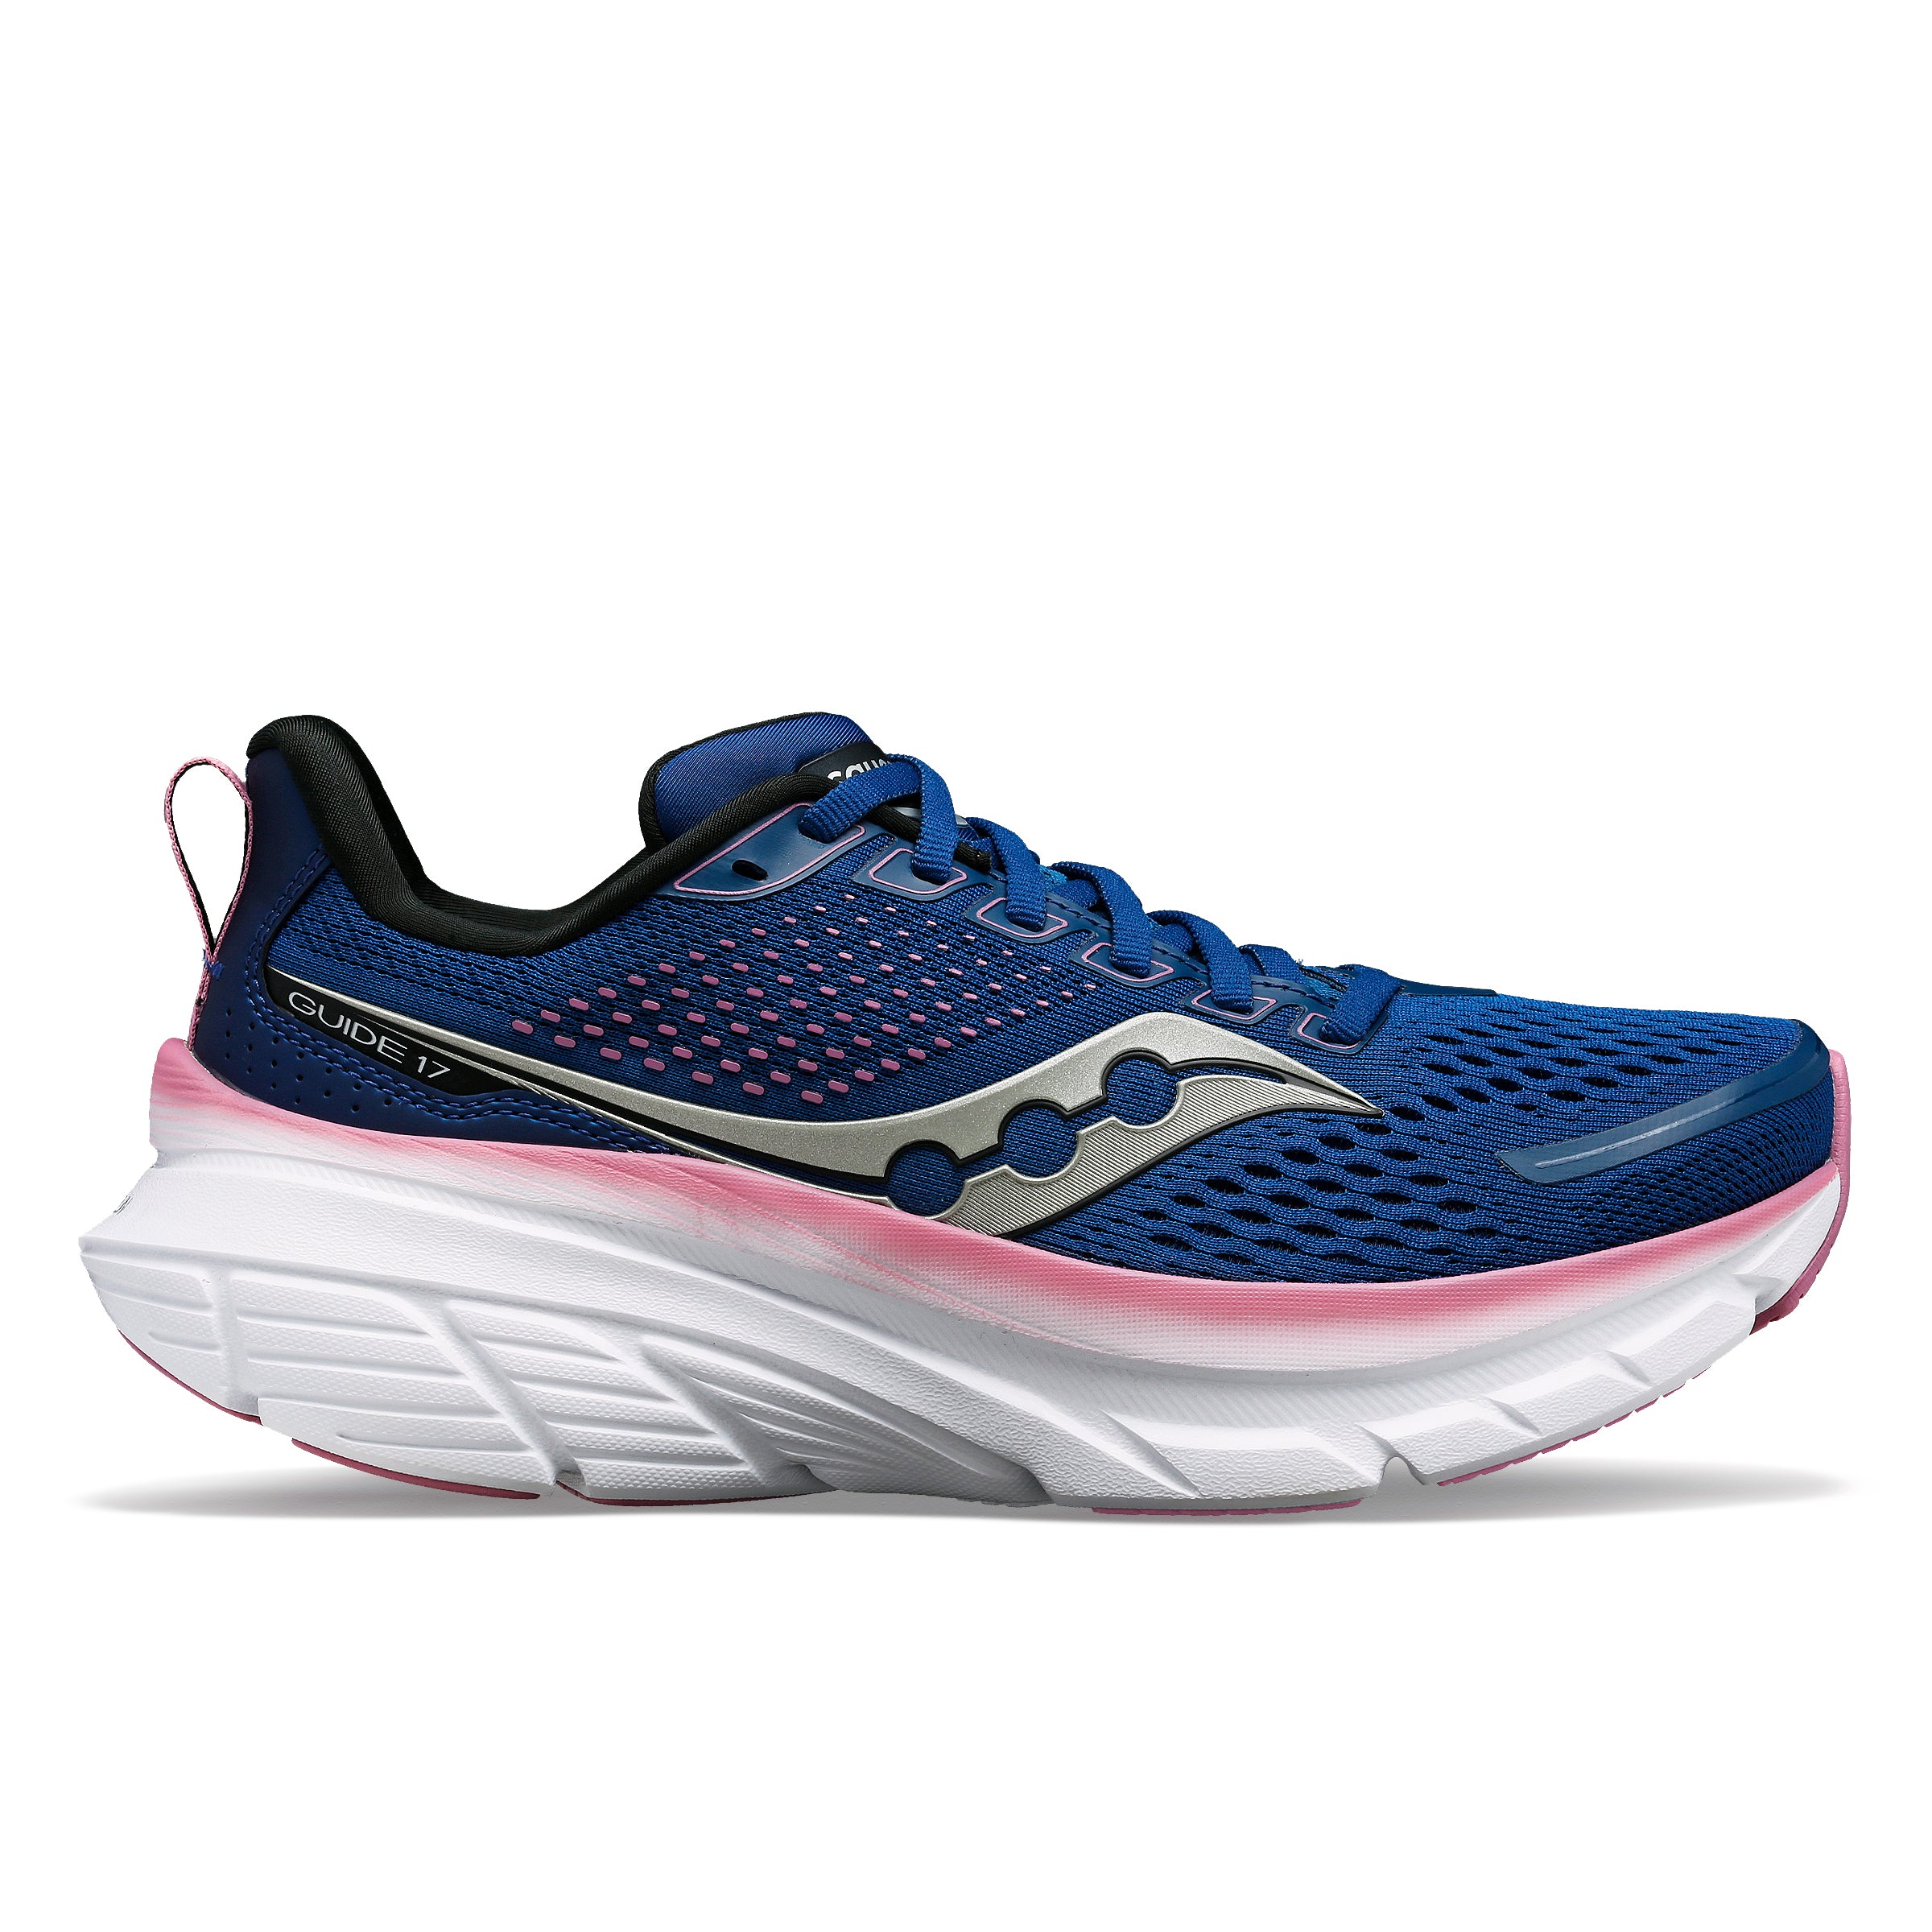 WOMEN'S GUIDE 17 - WIDE D - 106 NAVY/ORCHID | Performance Running